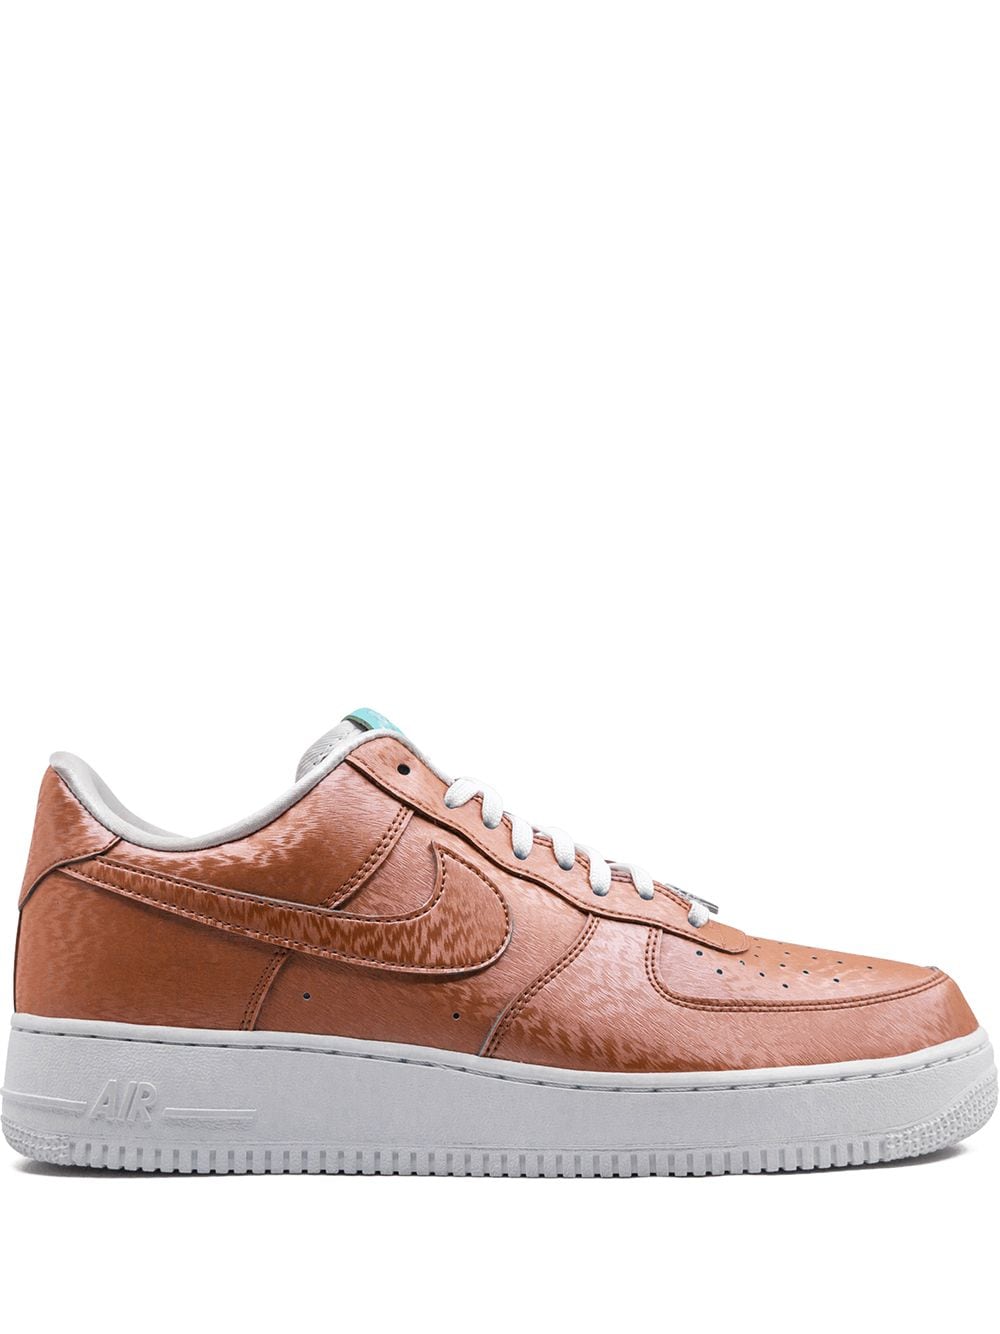 Nike Air Force 1'07 LV8 QS sneakers - Roze